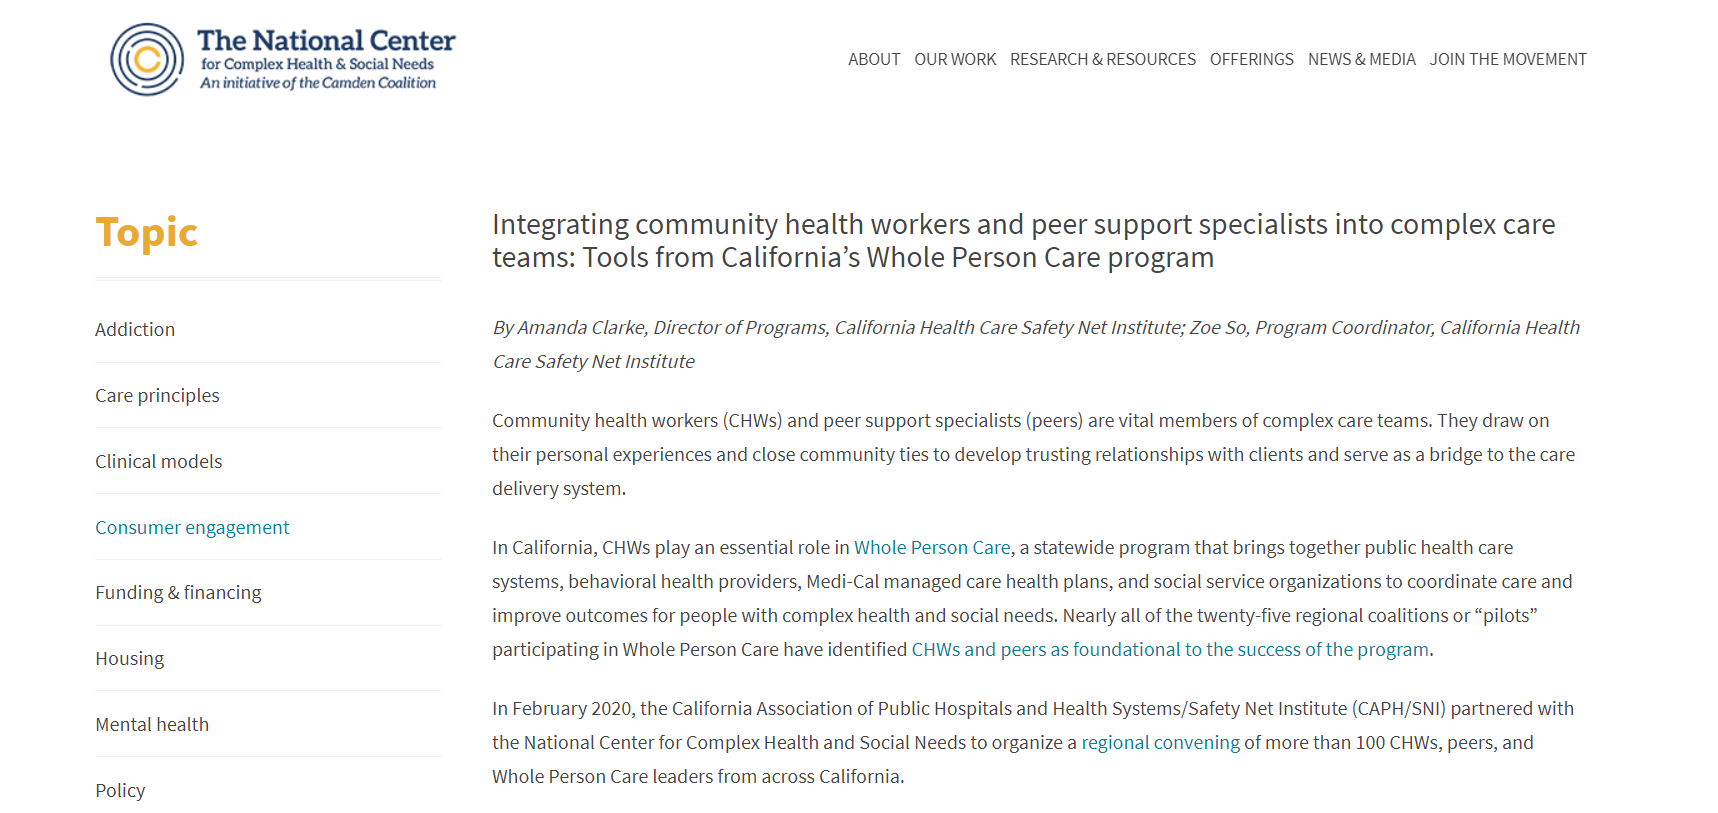 Integrating Community Health Workers and Peer Support Specialists into Complex Care Teams: Tools from California’s Whole Person Care Program